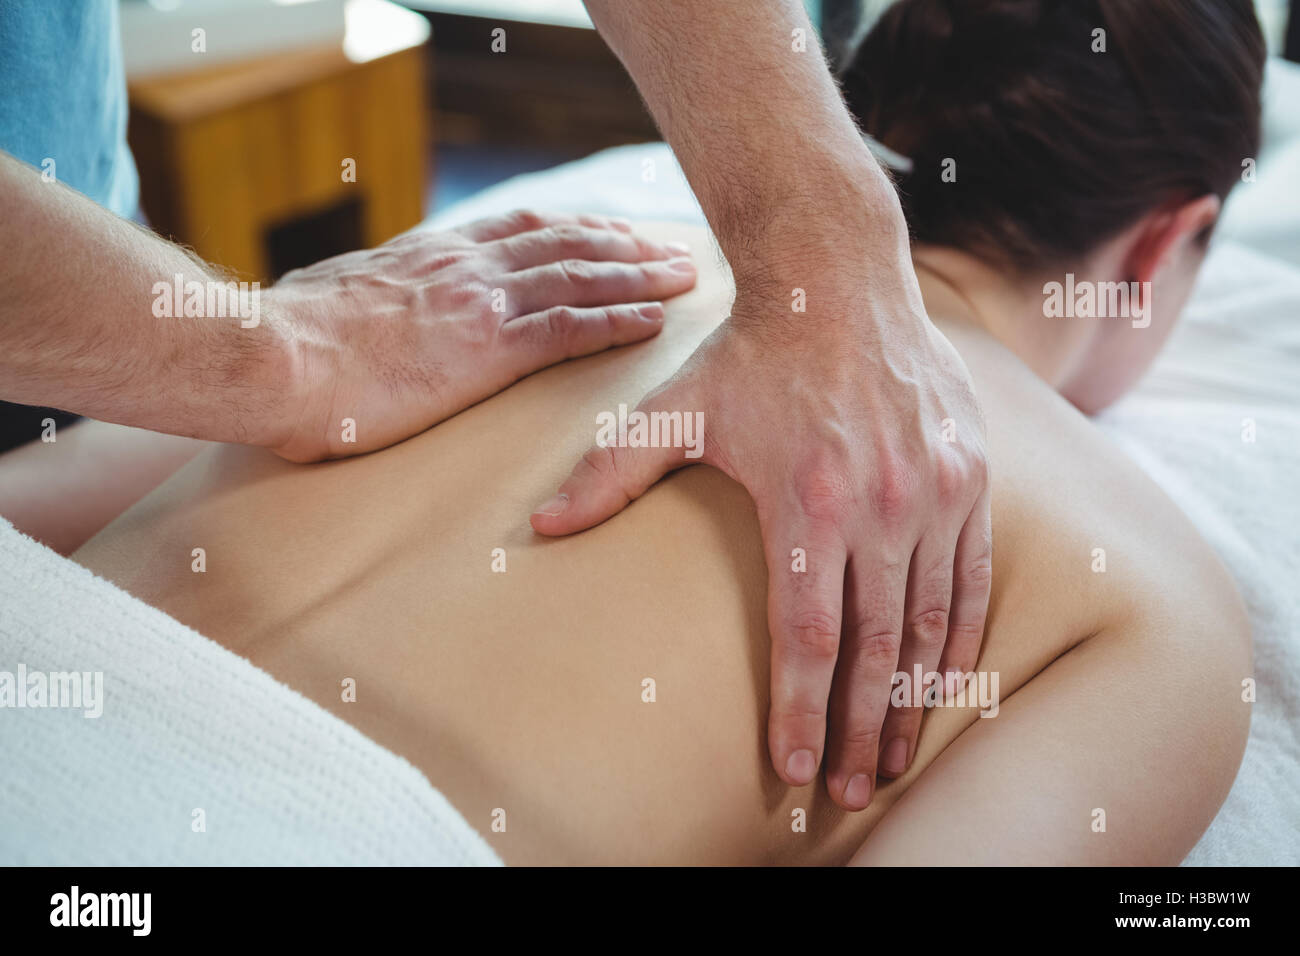 Physiotherapist giving physical therapy to the back of a female patient Stock Photo